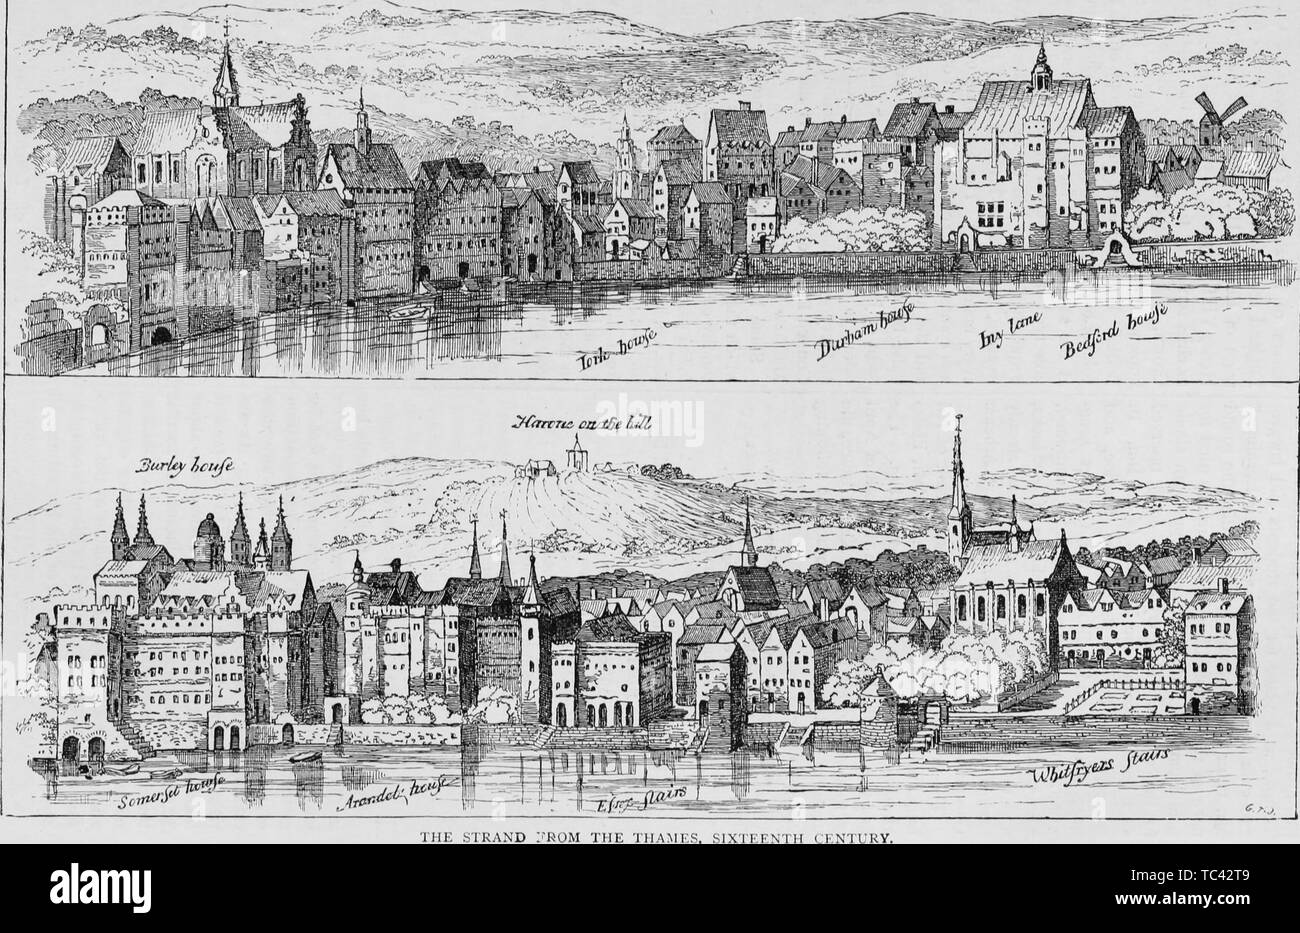 Engravings of the Strand viewed from the Thames River, London, England, from the book 'Old and new London: a narrative of its history, its people, and its places' by Thornbury Walter, 1873. Courtesy Internet Archive. () Stock Photo